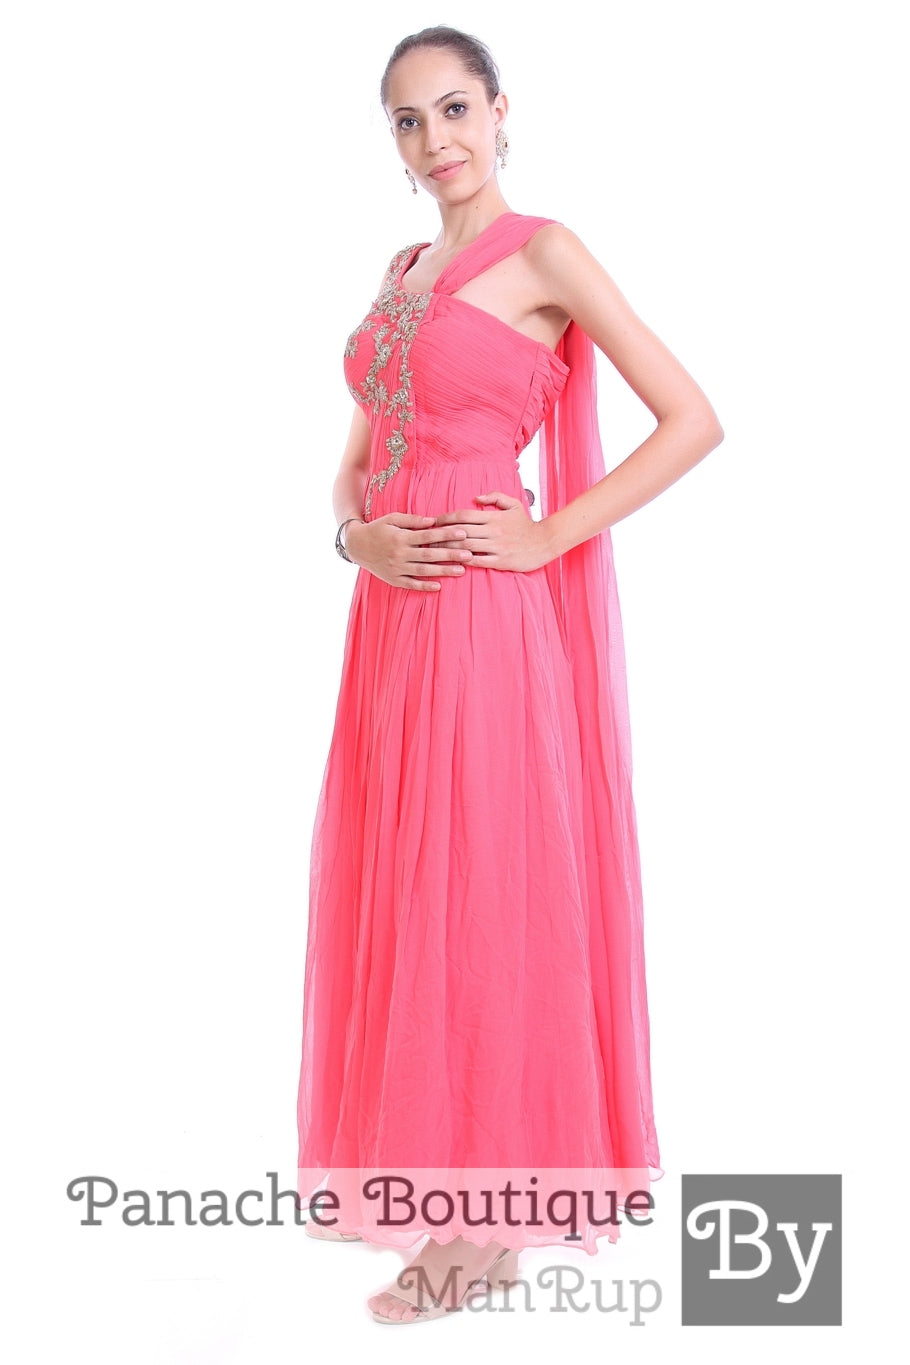 Pink Colour Saree Gown with Zardozi Embroidery